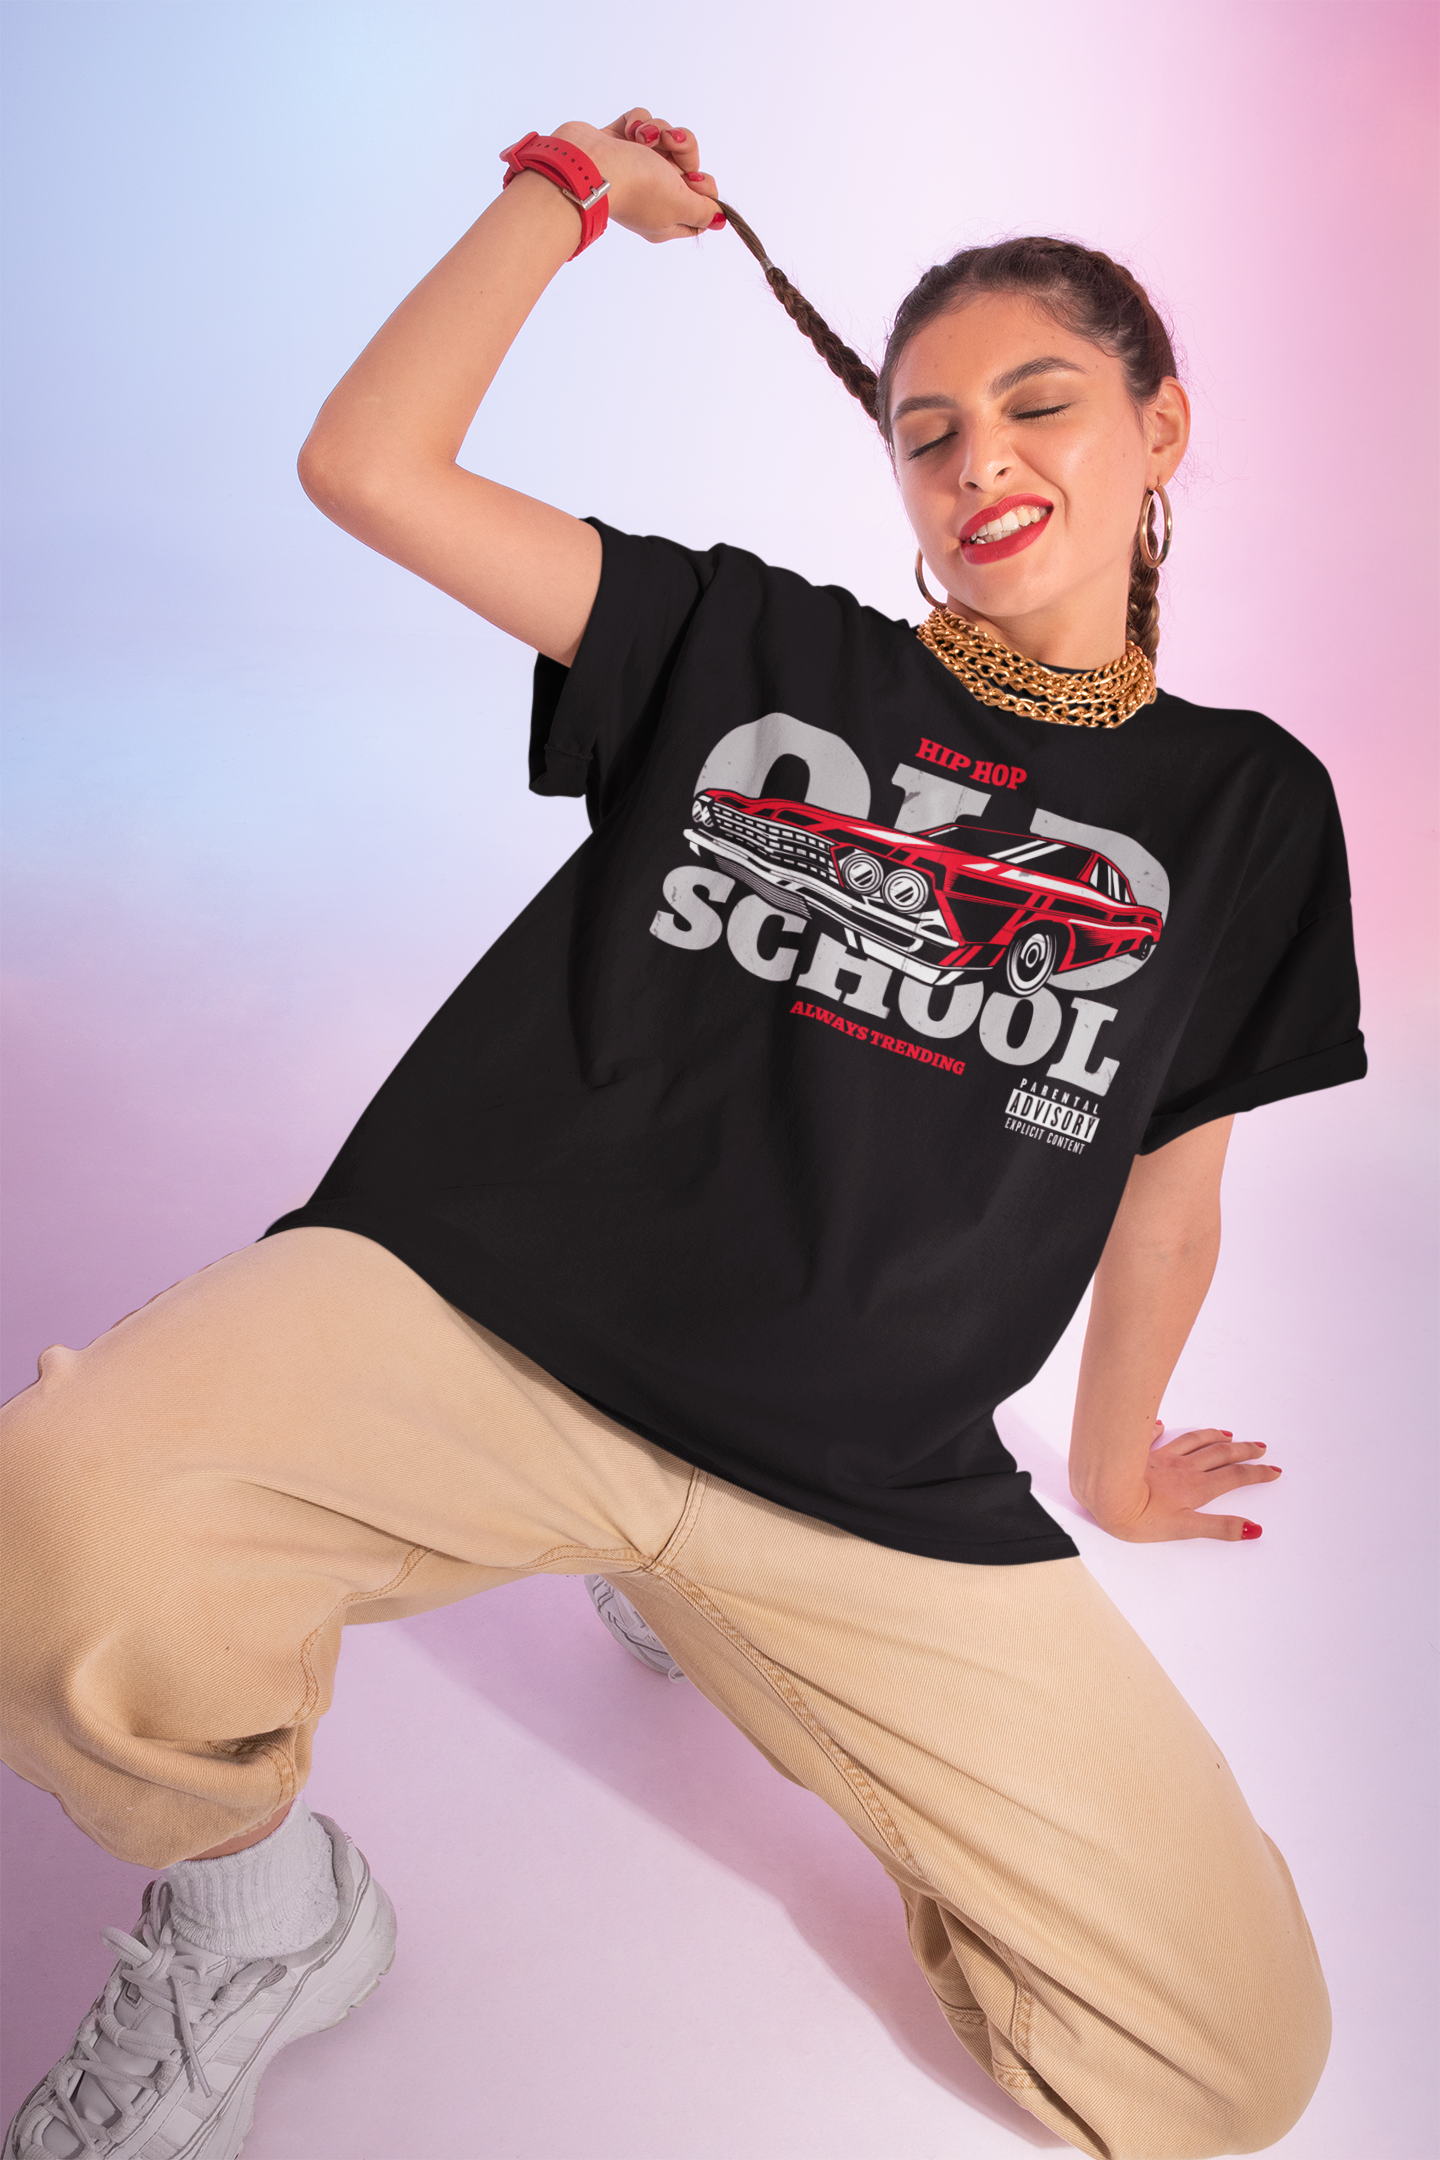 Old School Hip Hop Unisex Over-sized T-shirt